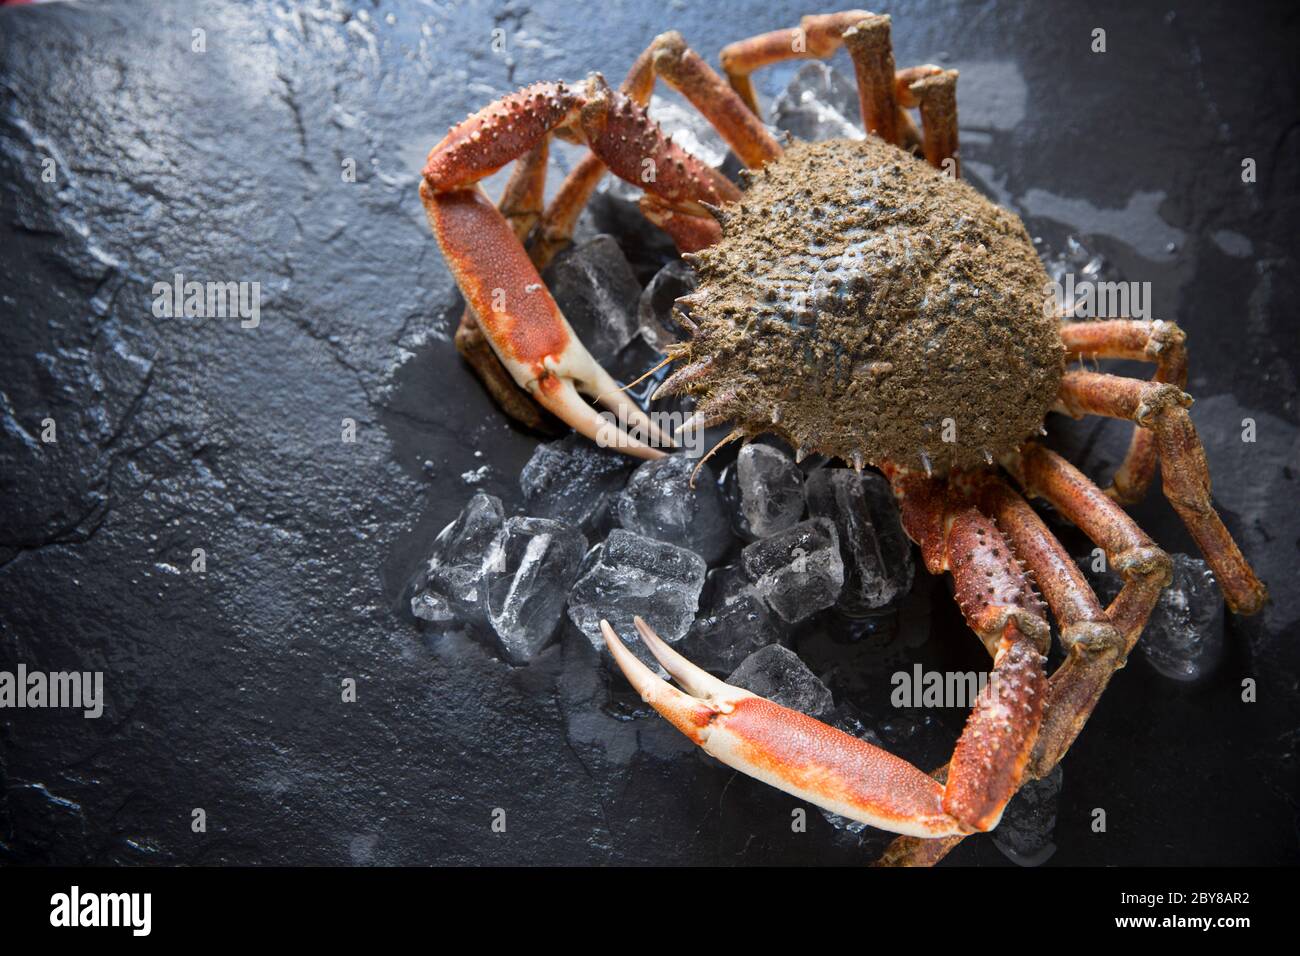 A raw, uncooked spider crab, Maja brachydactyla, caught in the English Channel that has been chilled on ice. Dorset England UK GB Stock Photo